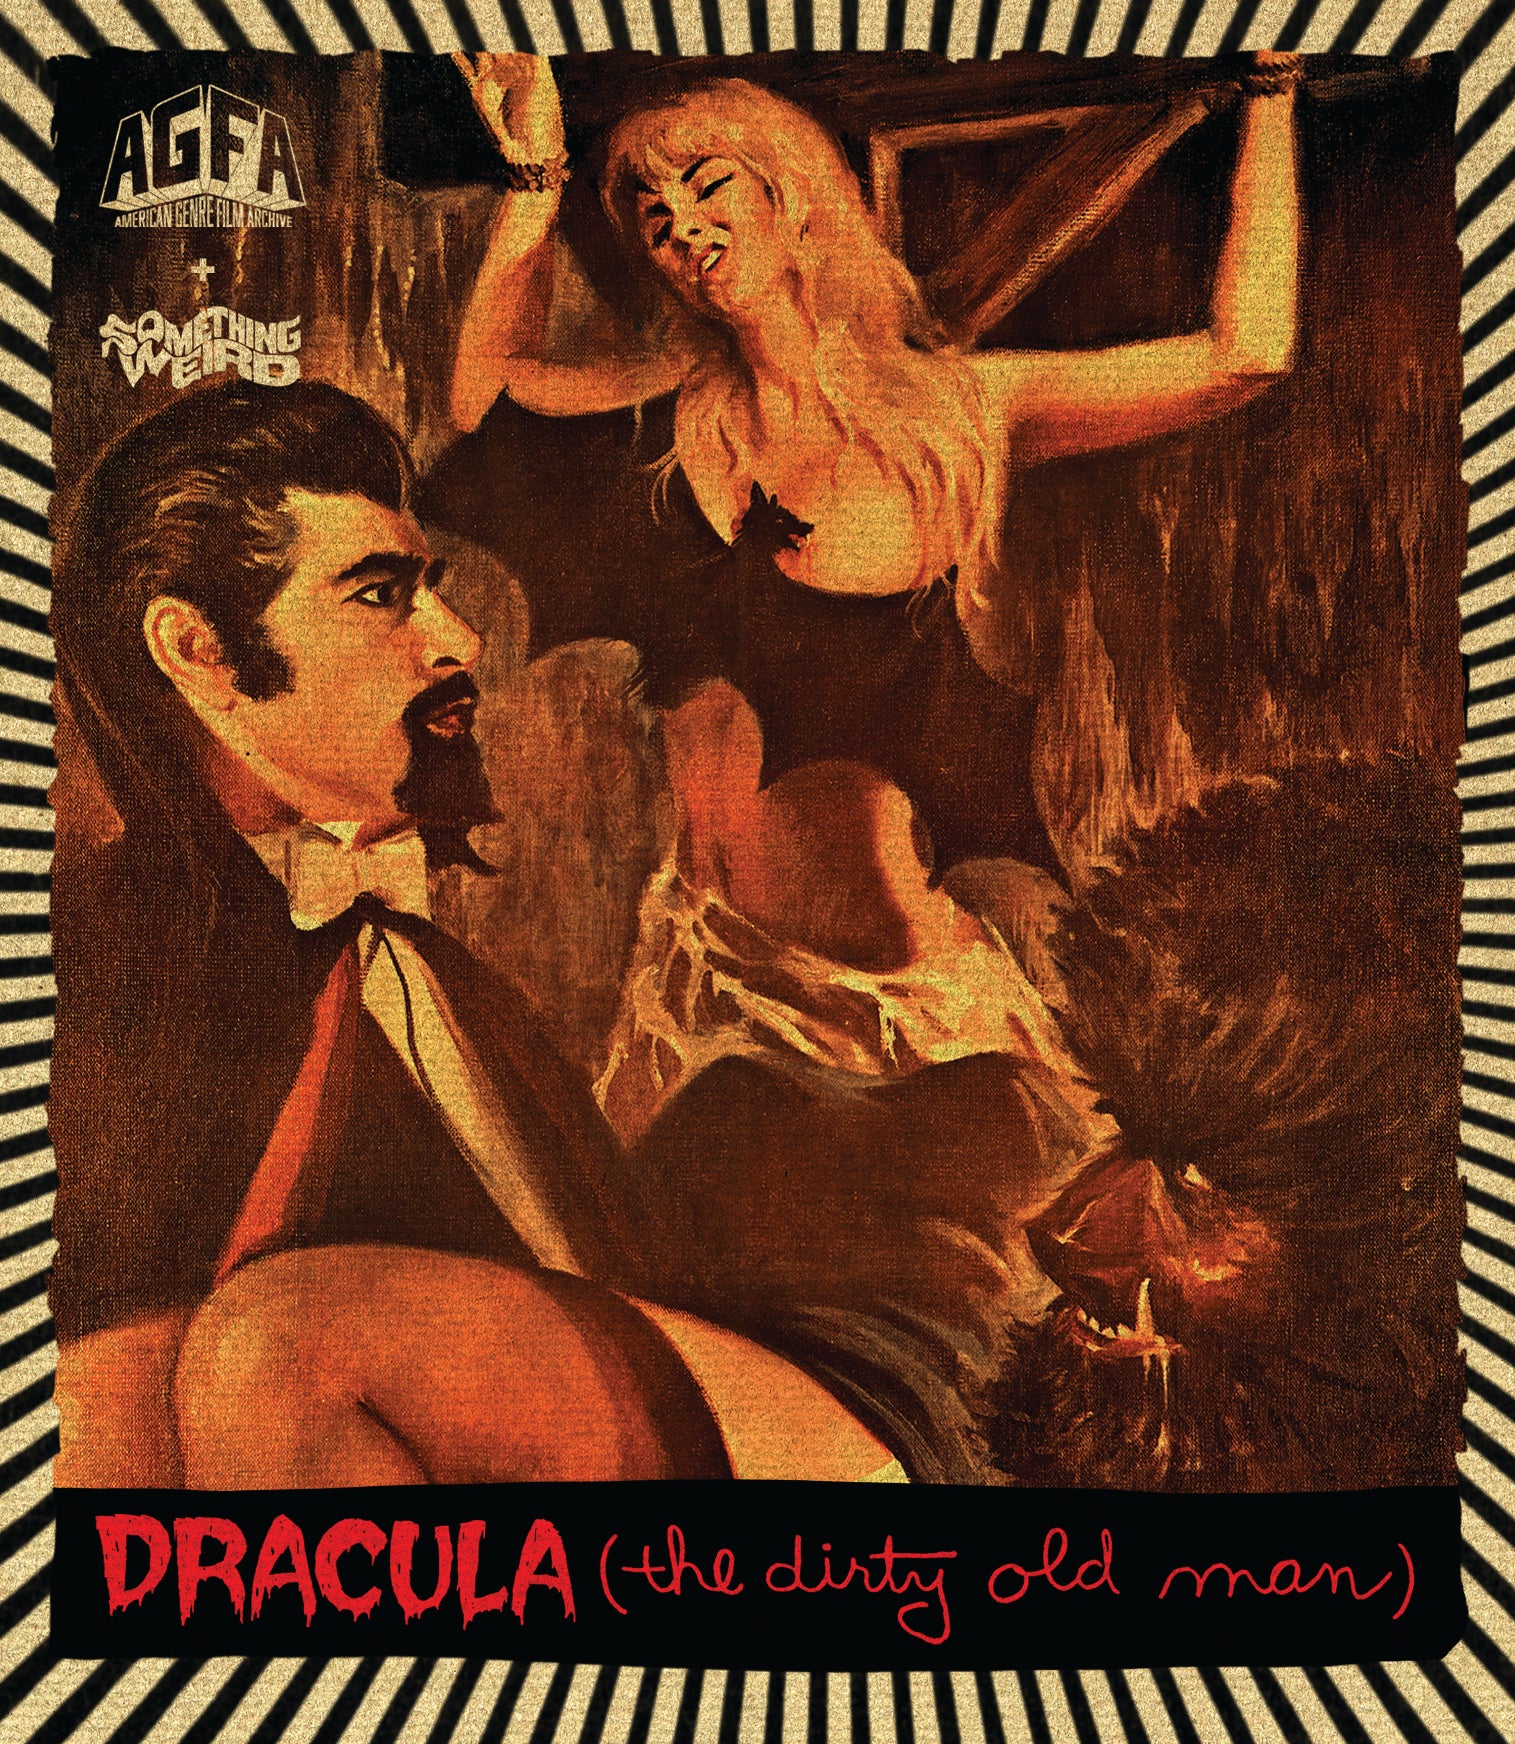 DRACULA (THE DIRTY OLD MAN) (LIMITED EDITION) BLU-RAY